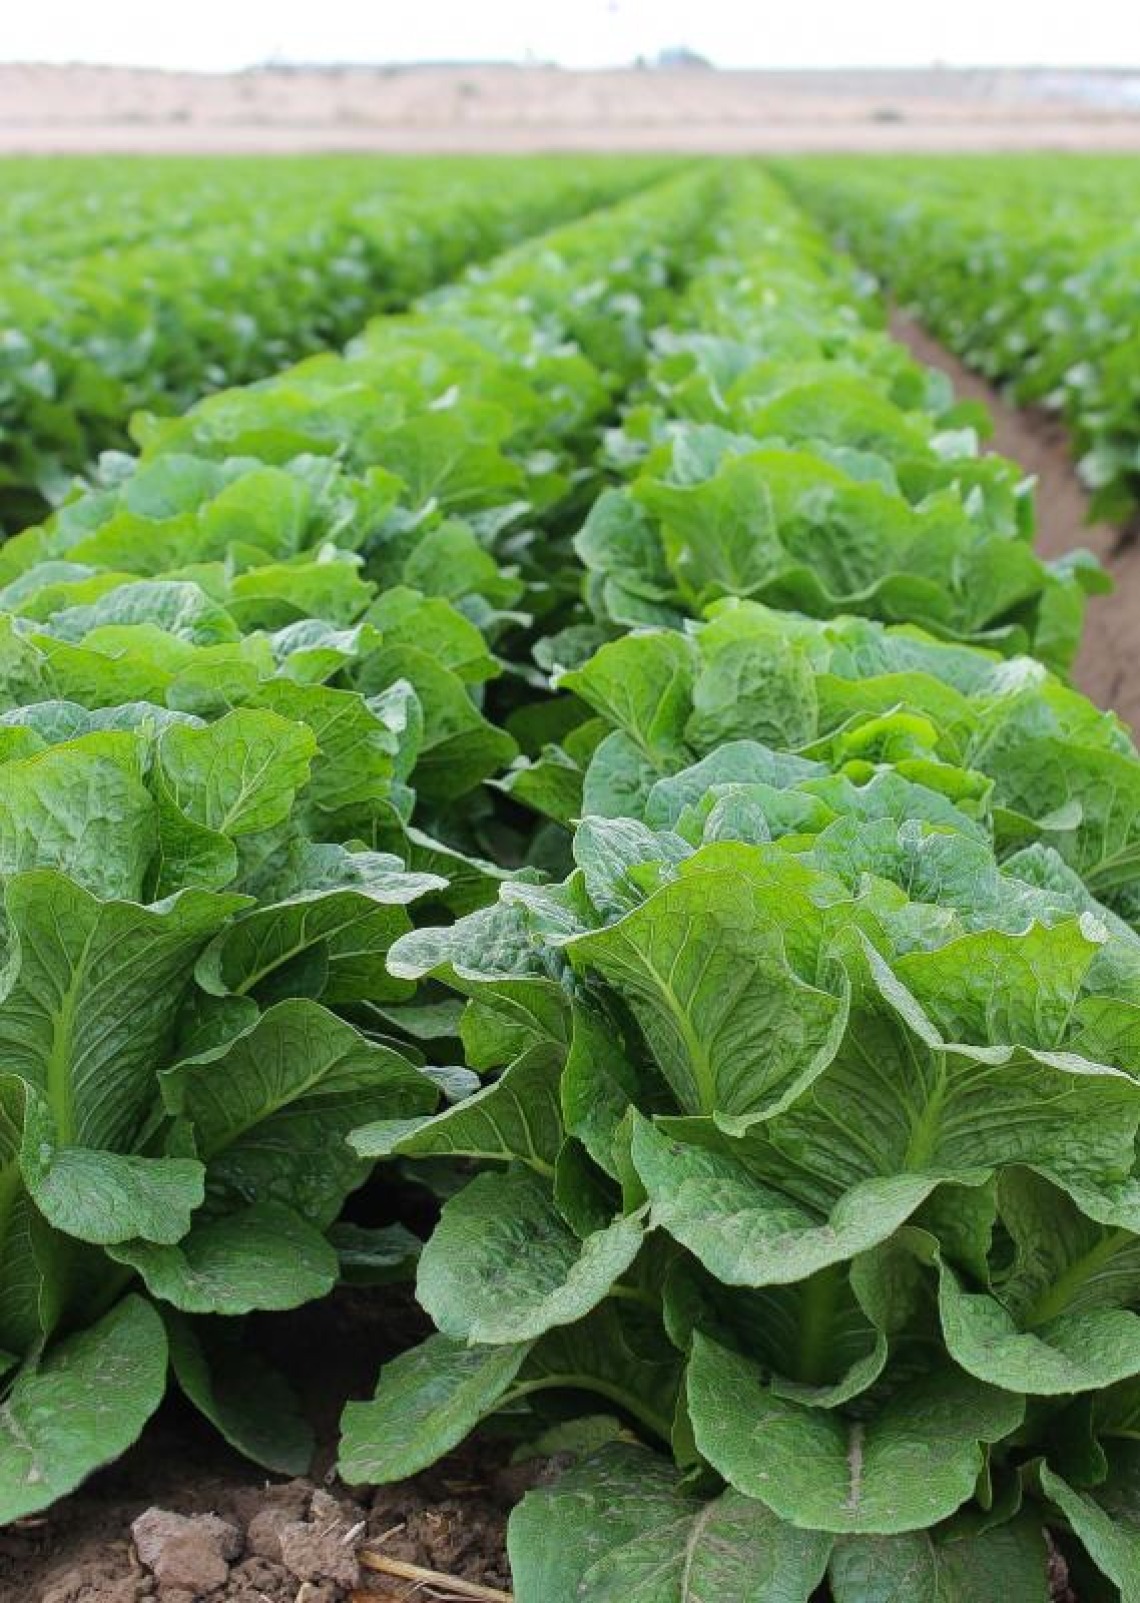 Close up image of lettuce growing in a field